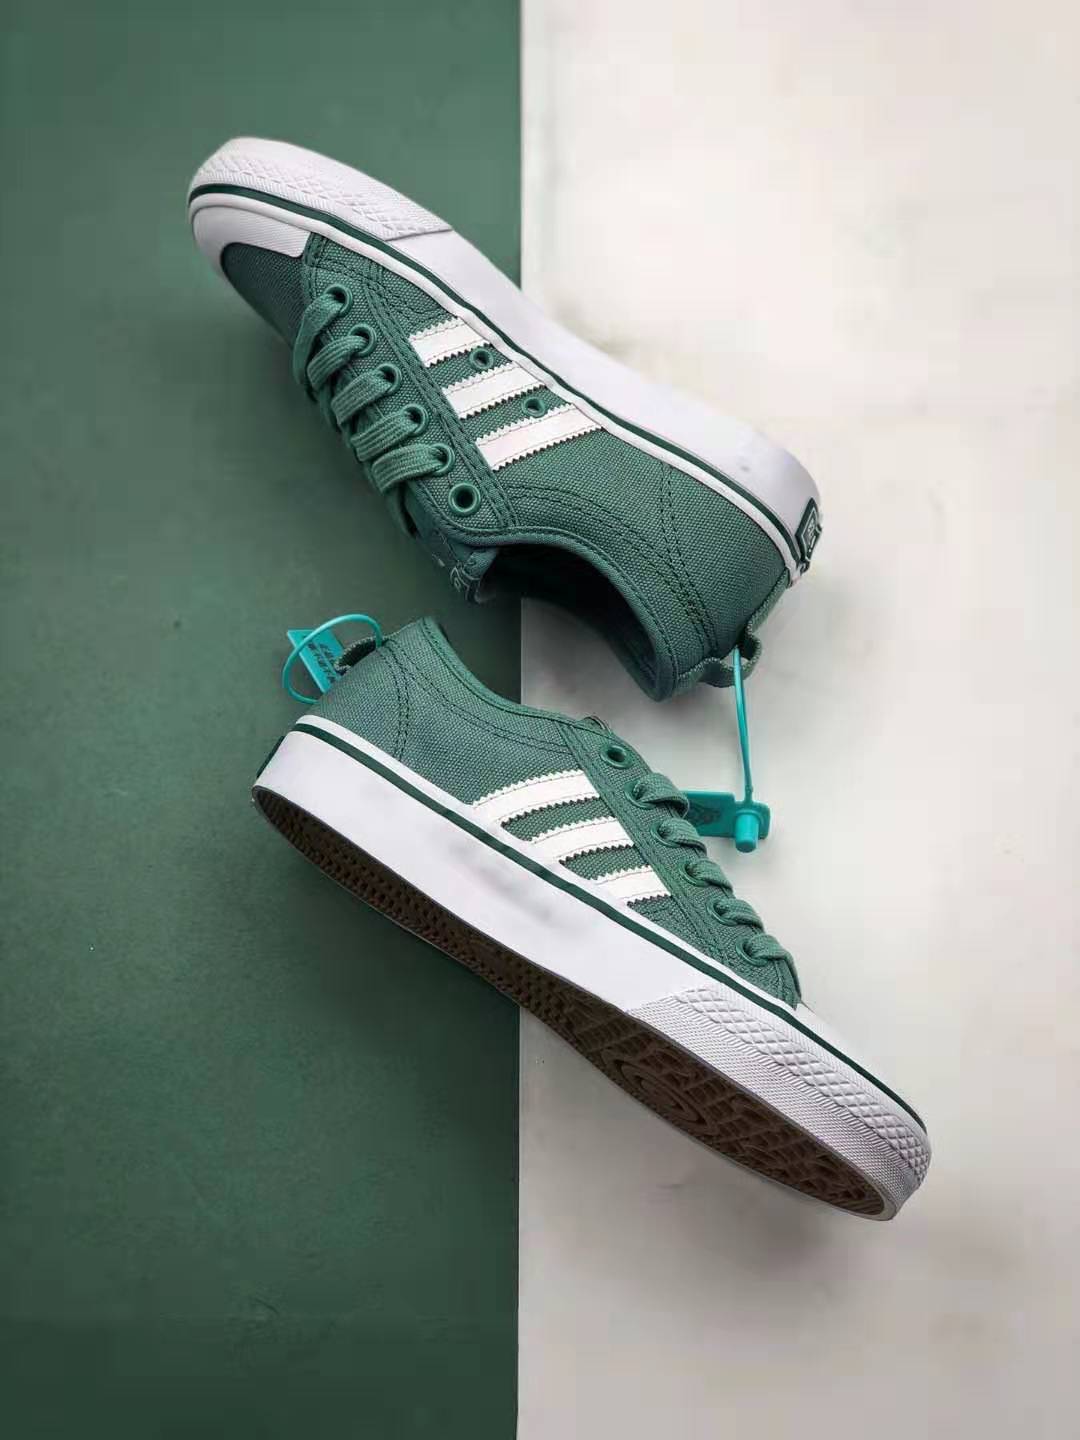 Adidas Originals Nizza Sneakers In Green CQ2329 - Classic Style with a Fresh Twist